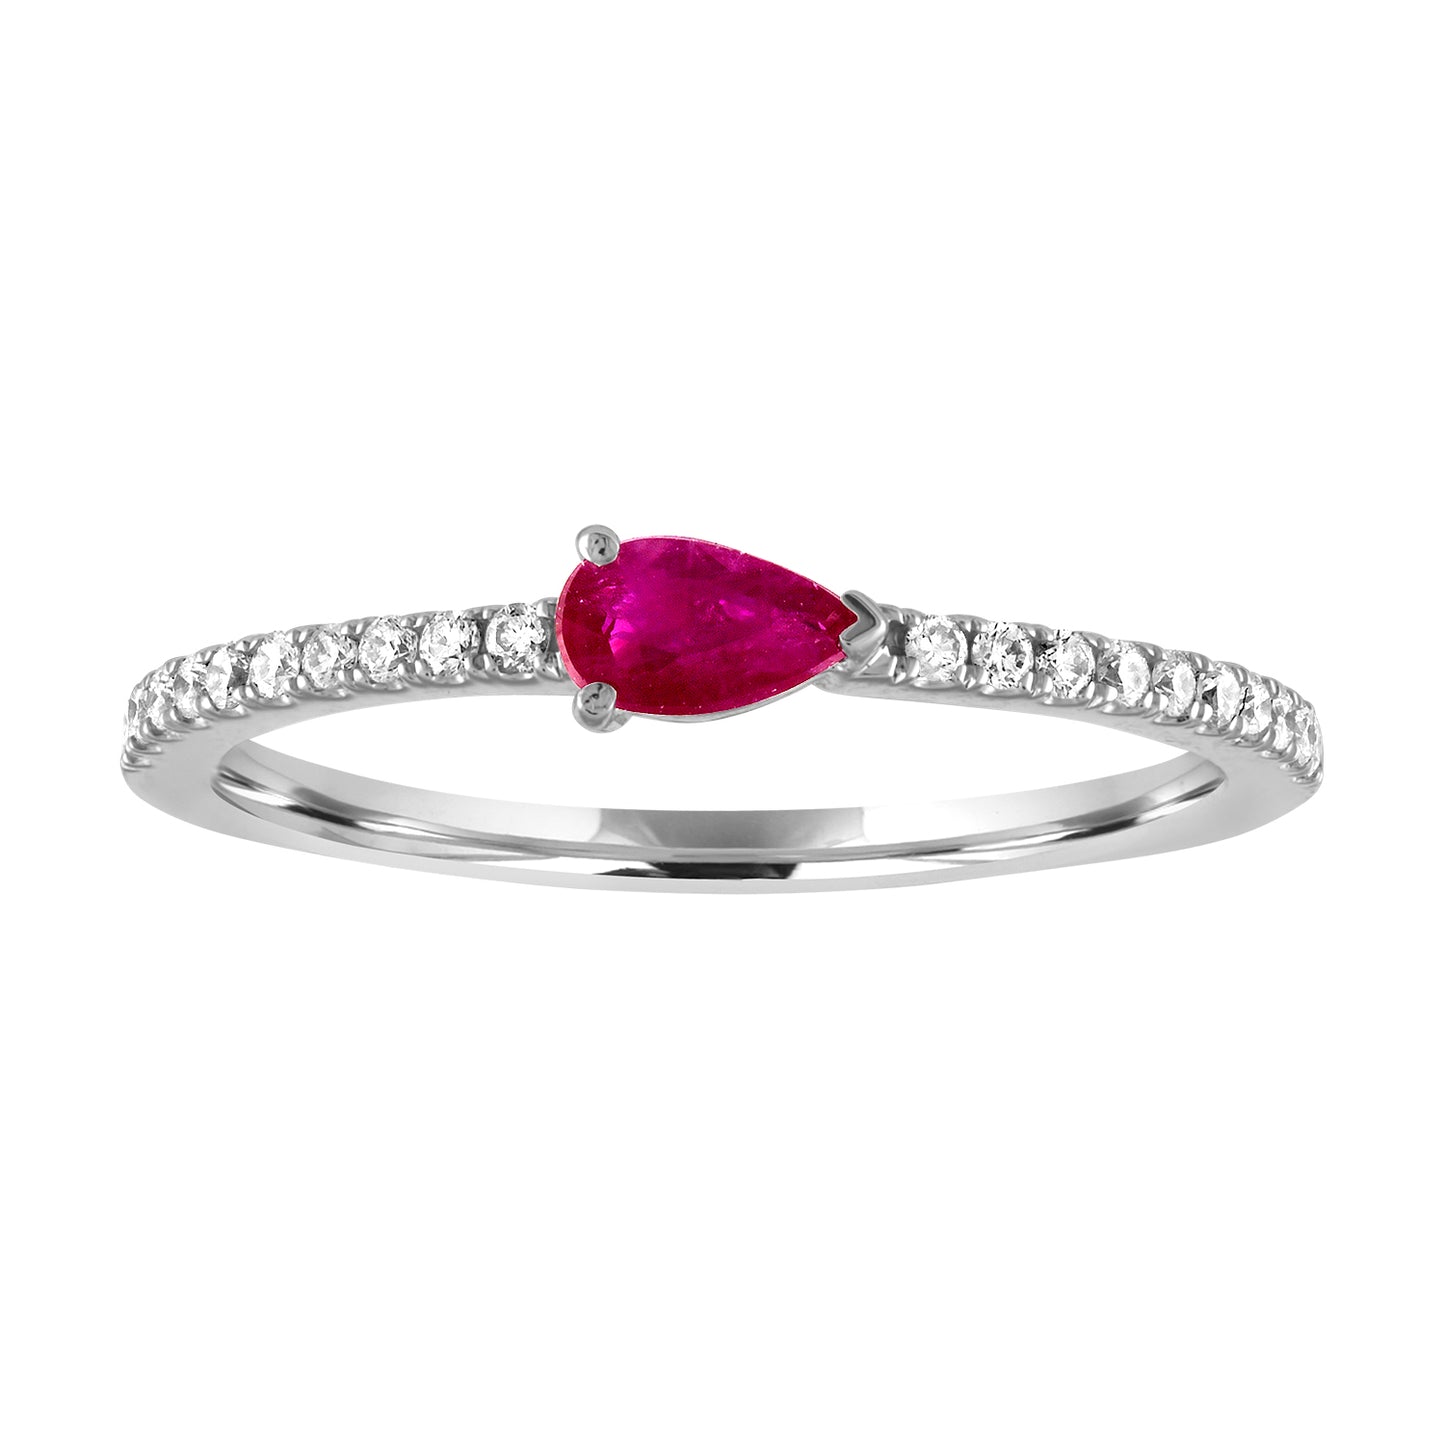 White gold skinny band with a pear shaped ruby in the center and round diamonds on the shank. 